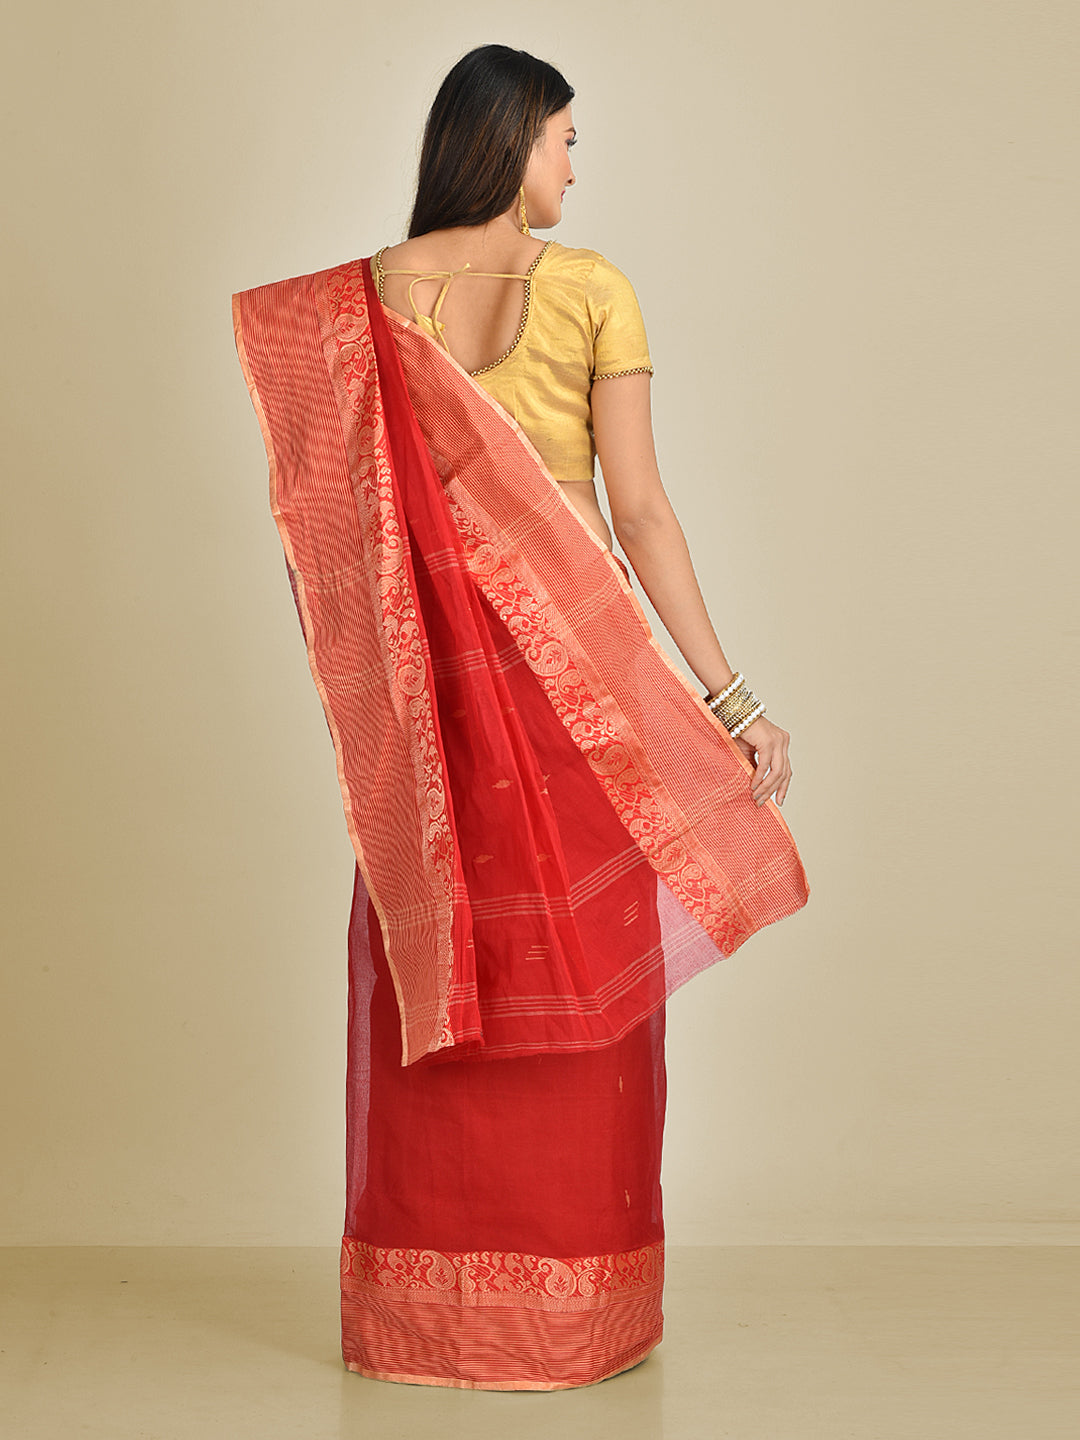 Women's Red Pure Cotton Hand woven Tant Tangaile Saree - Sajasajo